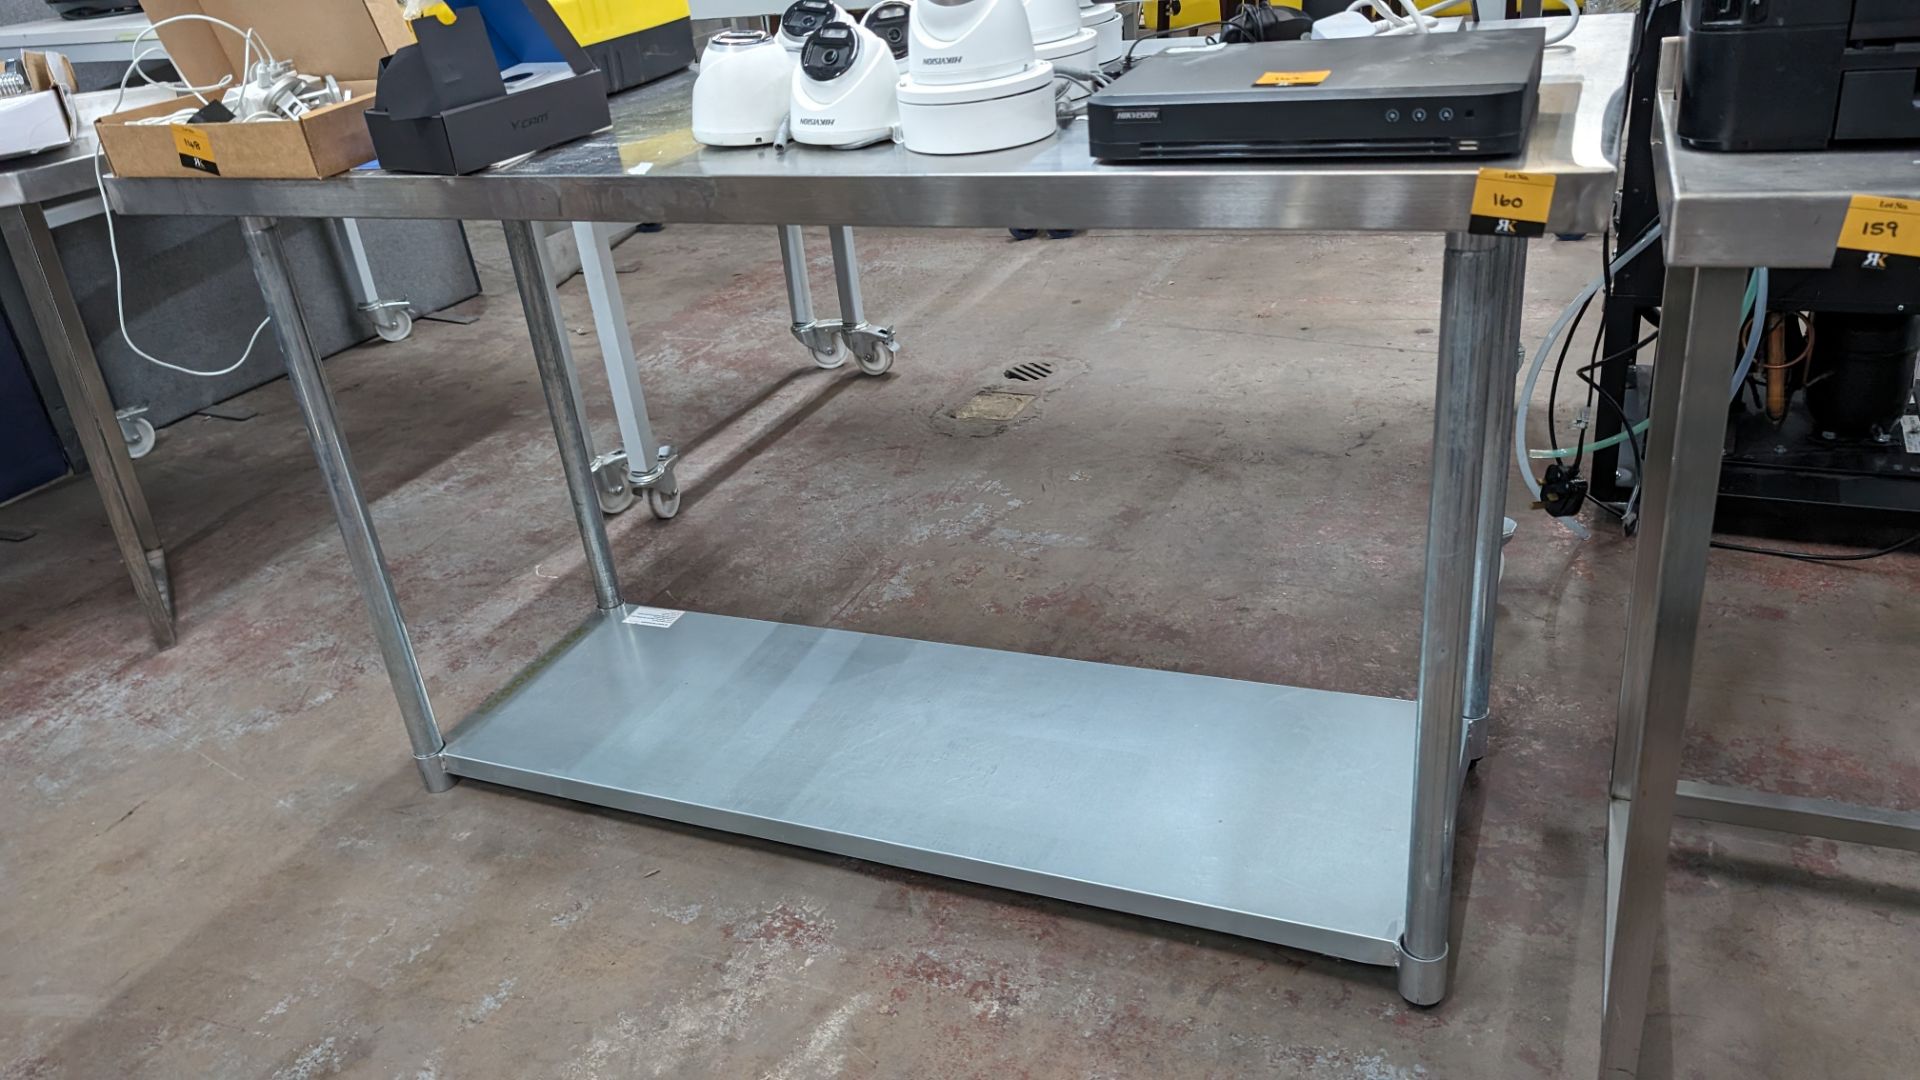 Stainless steel twin tier table, max dimensions: 890mm x 610mm x 1530mm